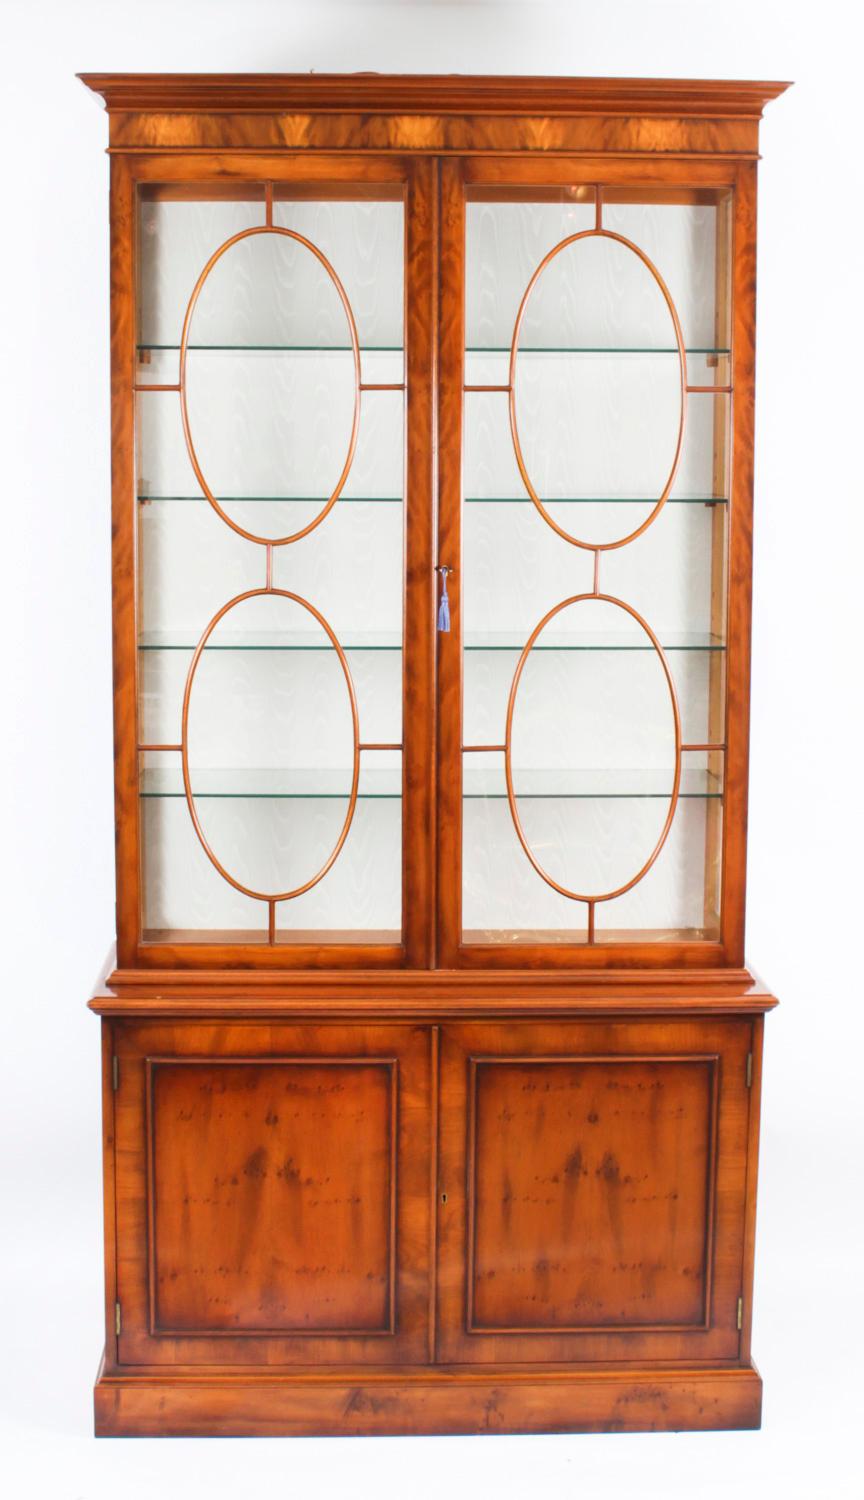 This is a beautiful pair of Vintage yew wood bookcases, dating from the late 20th C.

This magnificent pair of bookcases feature astragal glazed doors in the upper section revealing four glass shelves in each, that can all be adjusted for height.